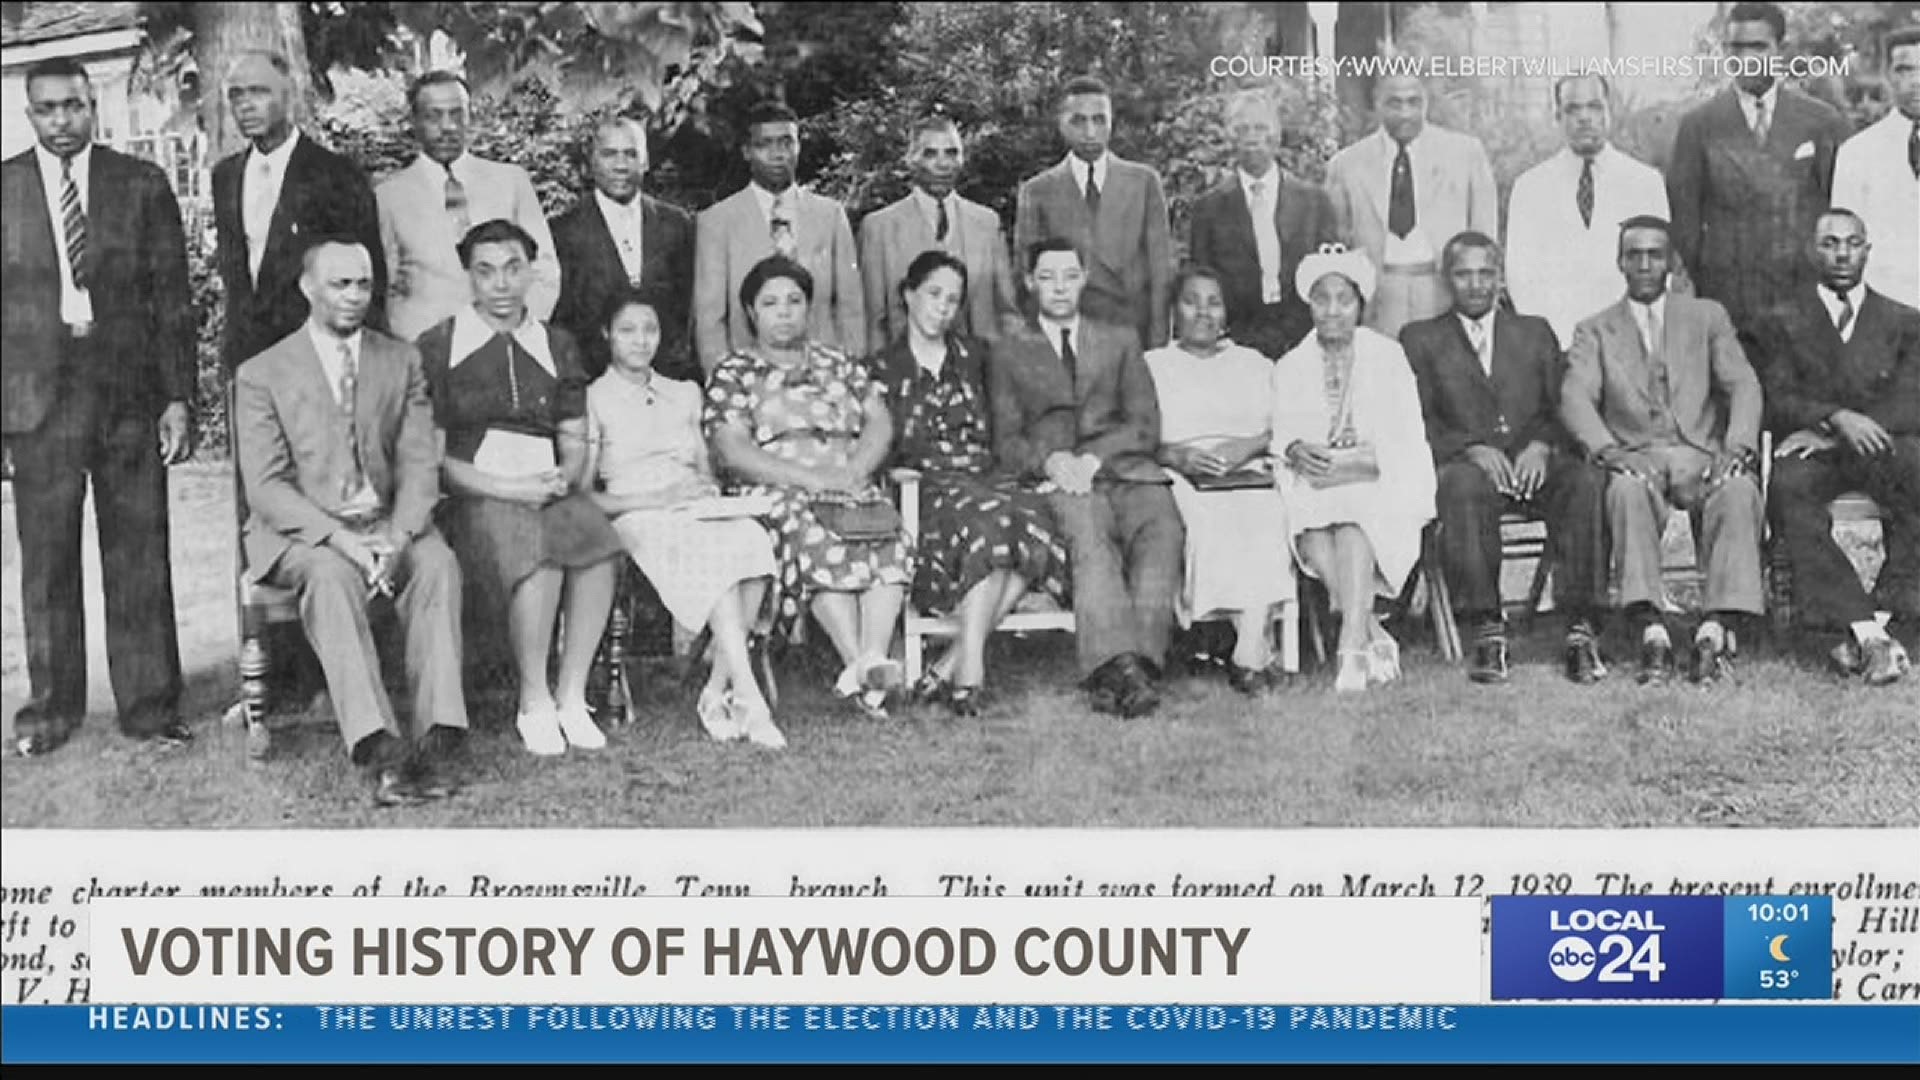 Haywood County has a population of roughly 17,500 people.  More than 7,000 voted in the 2020 presidential election and it’s been a blue leaning county for decades.